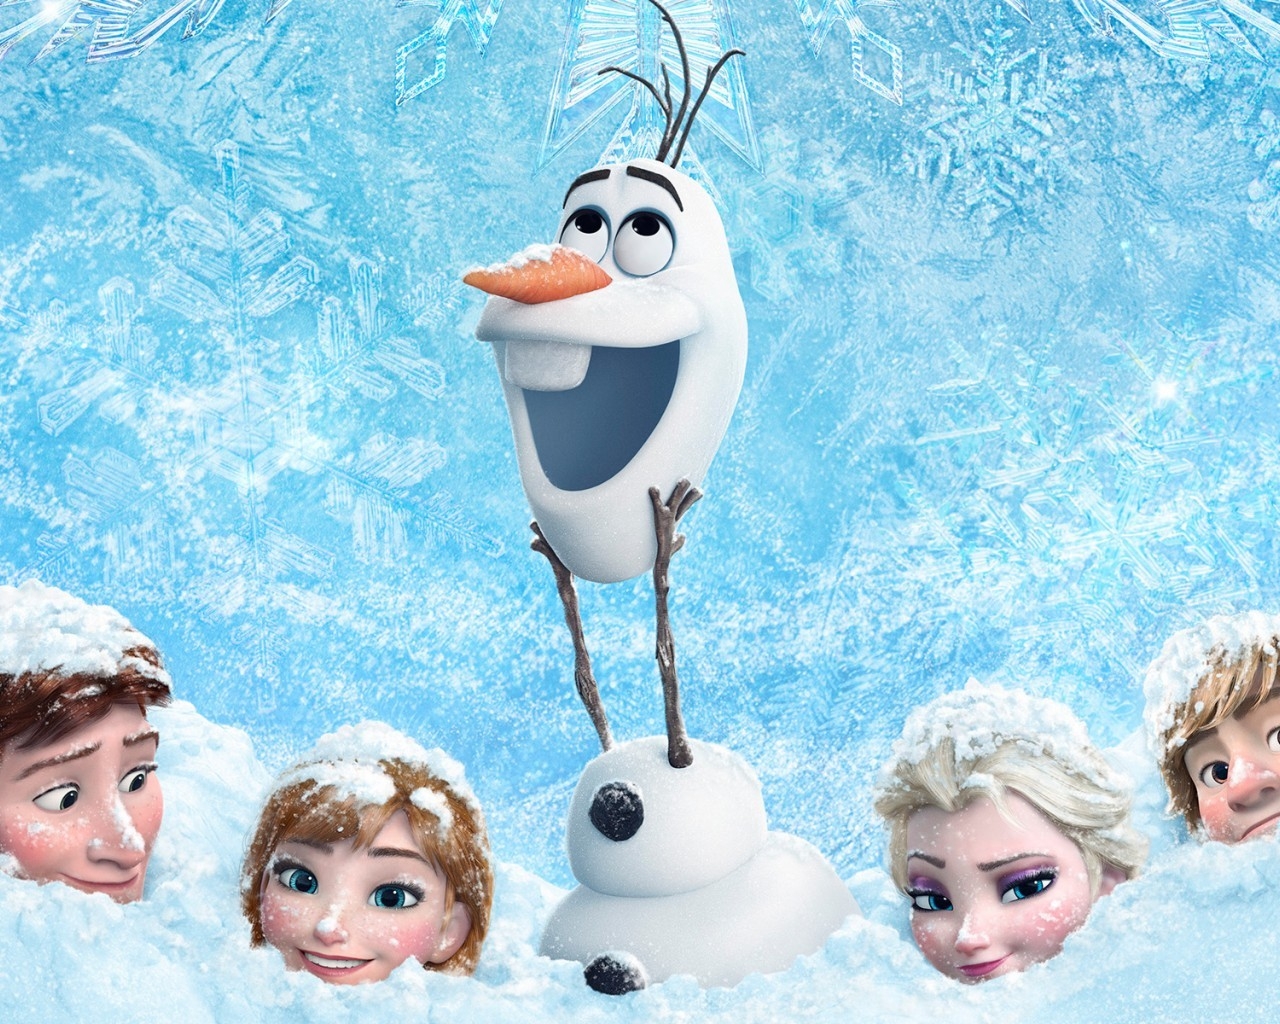 Frozen Animation for 1280 x 1024 resolution